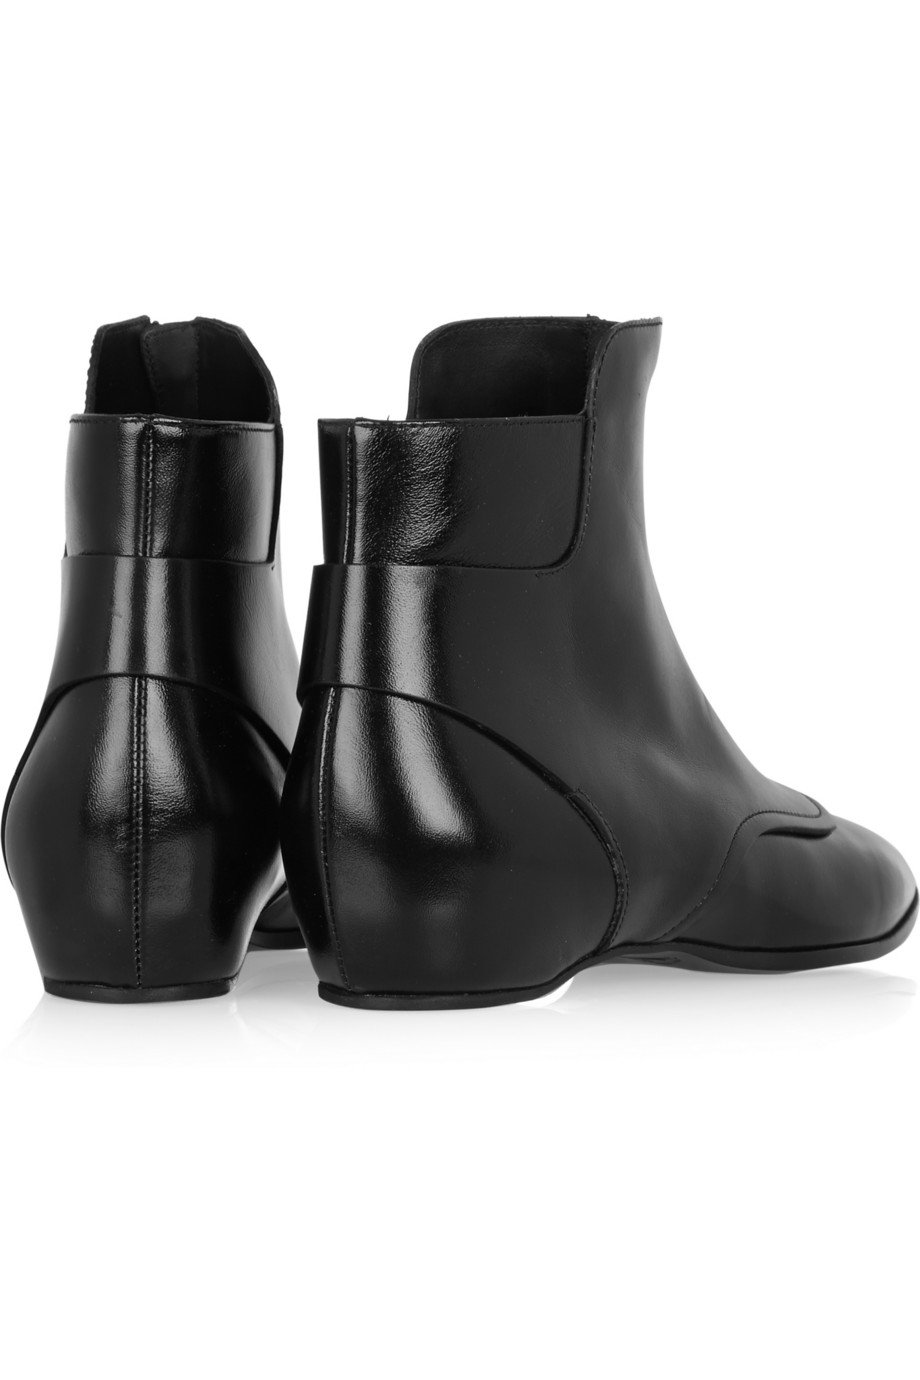 Tod's Glossed-Leather Ankle Boots in Black - Lyst